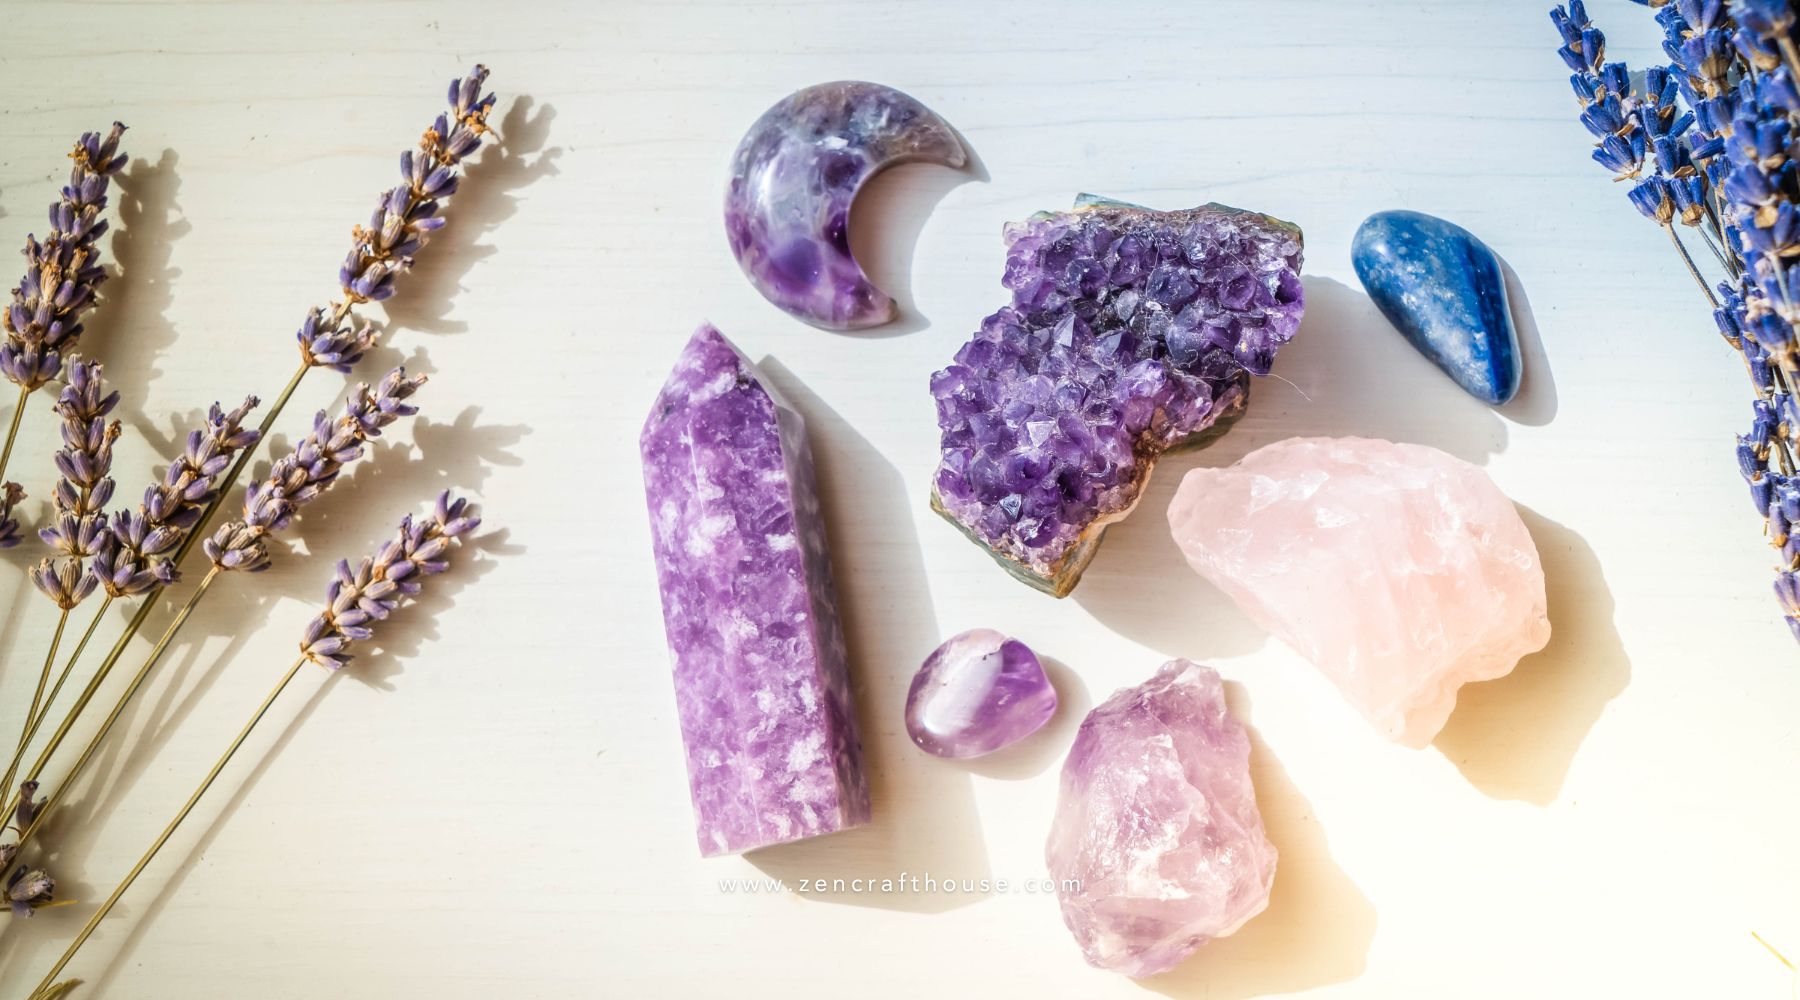 10 Best Crystals And Their Healing Properties: A Healing Journey